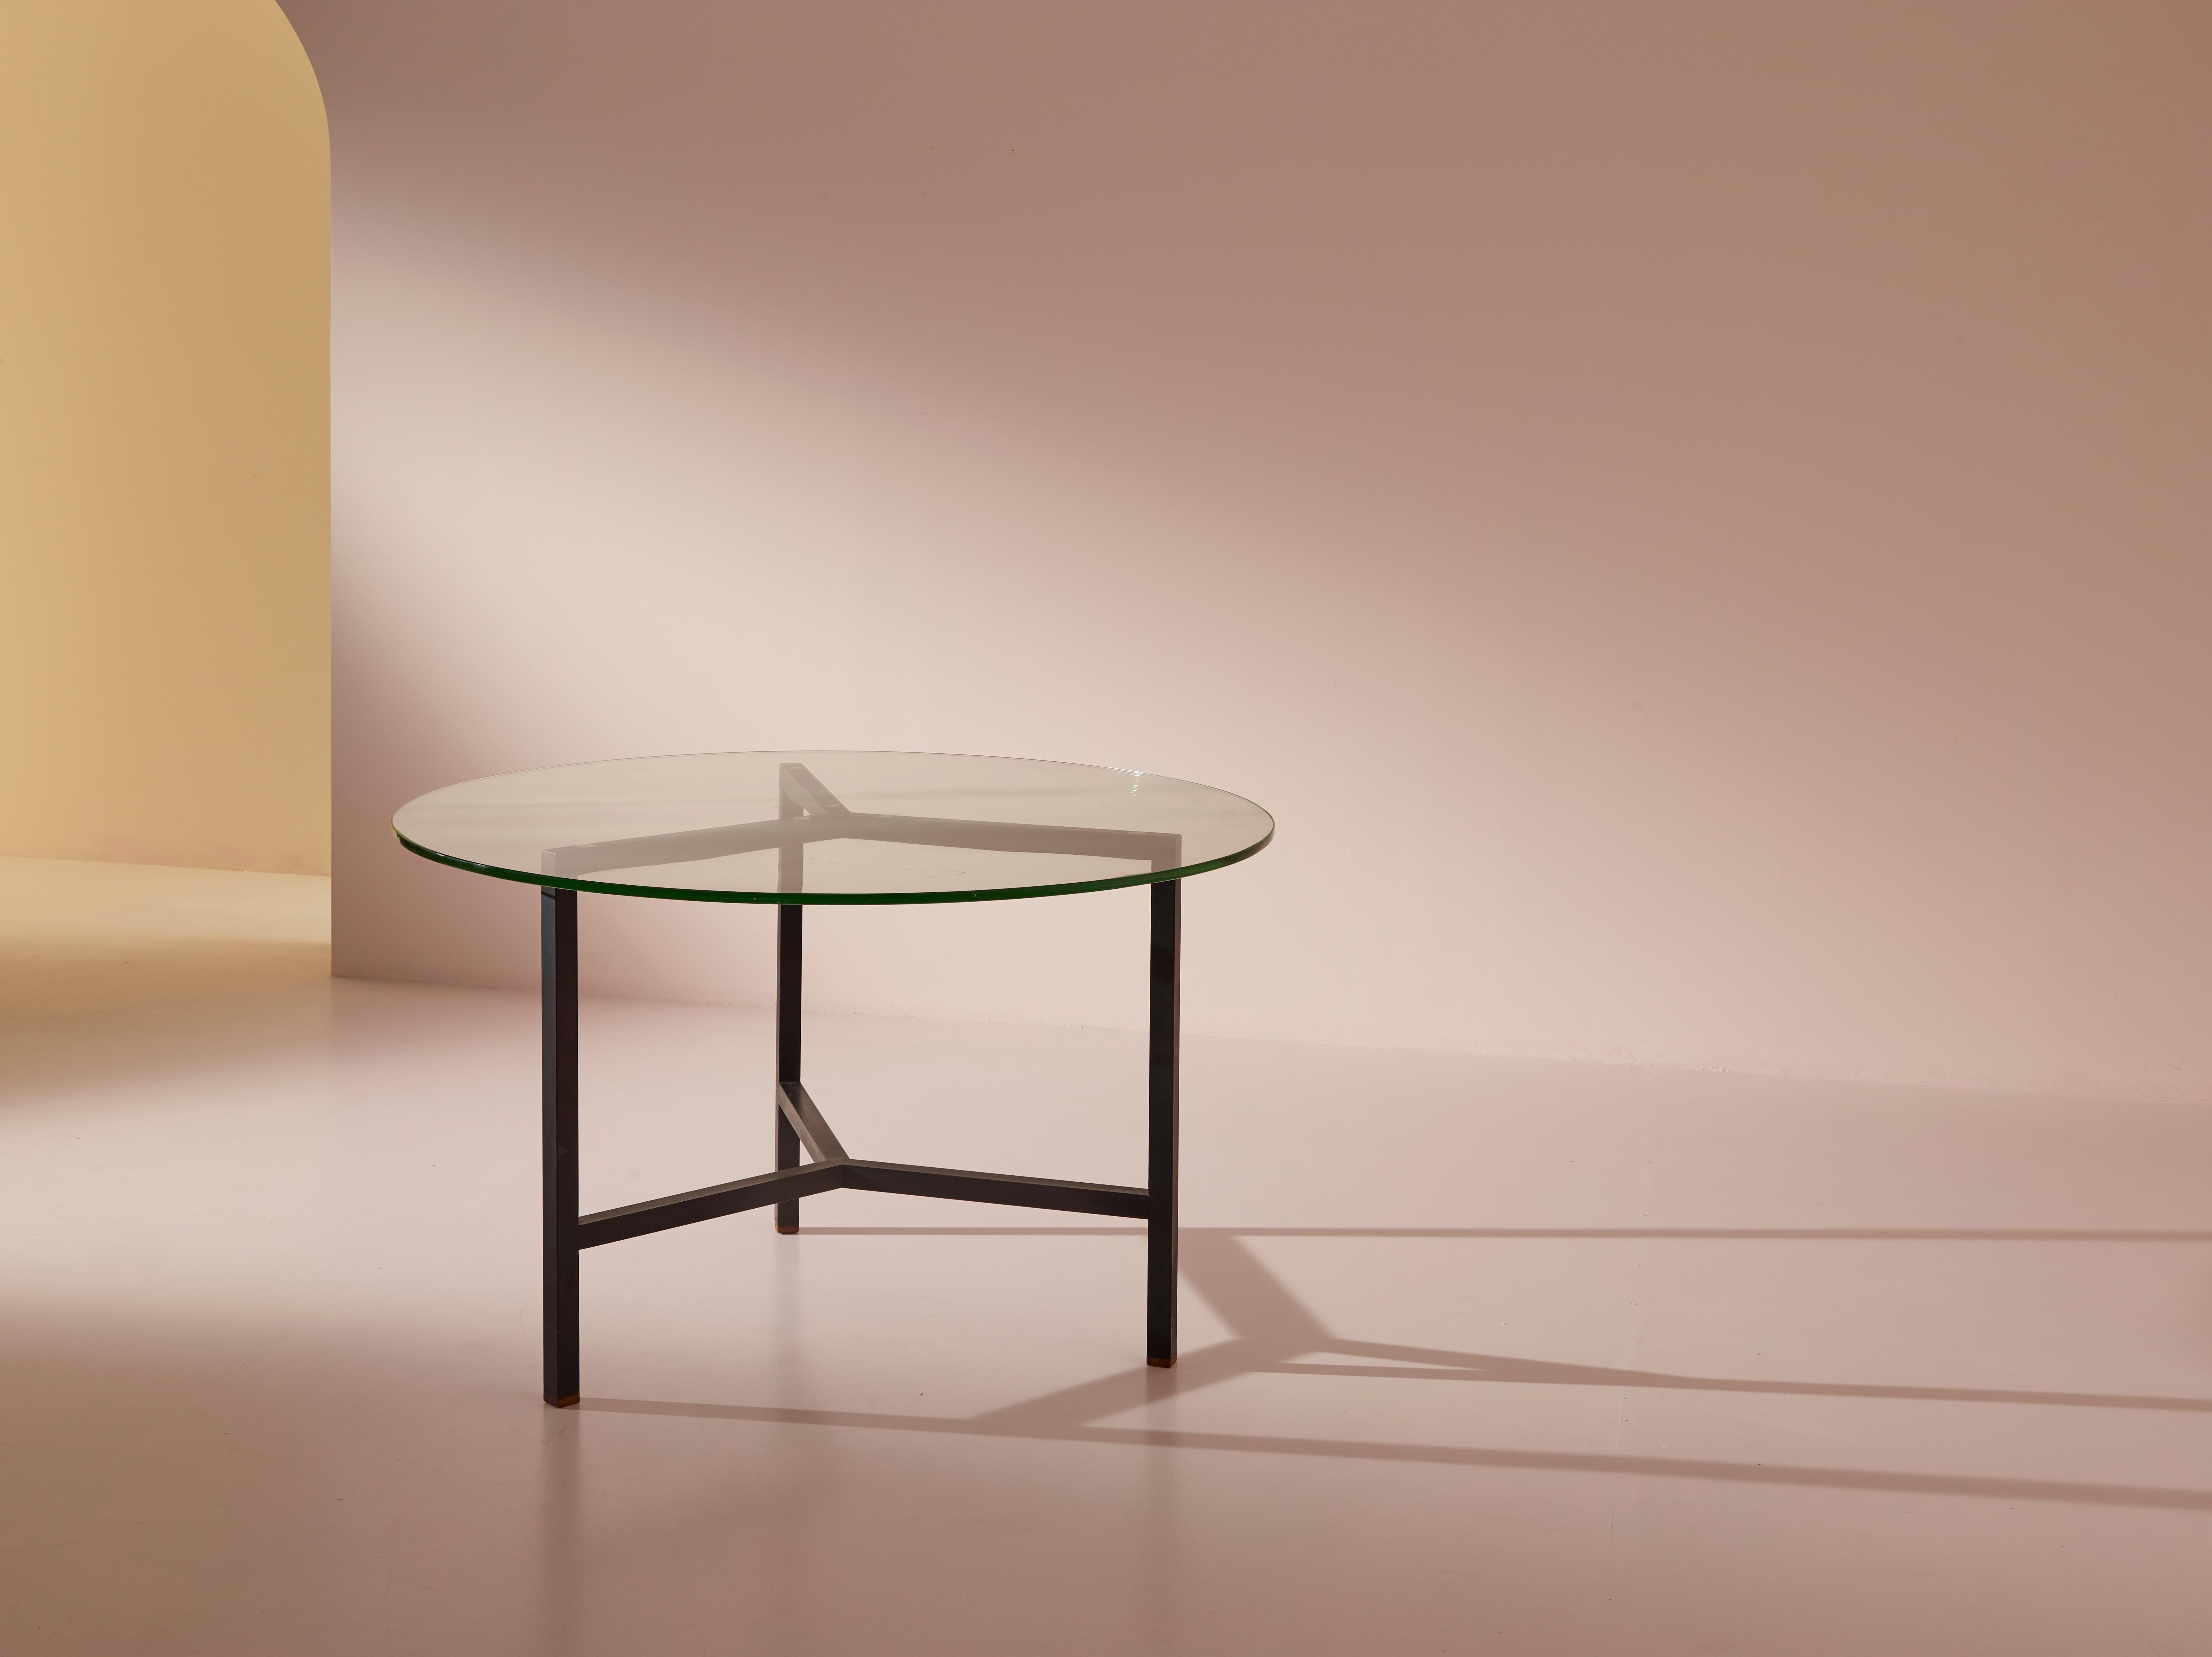 A round metal and glass dining table of Italian manufacture from the 1950s. 

In its simplicity, this small table expresses the potential of two materials that may seem opposites but can nonetheless interact with great aesthetic appeal. The hardness